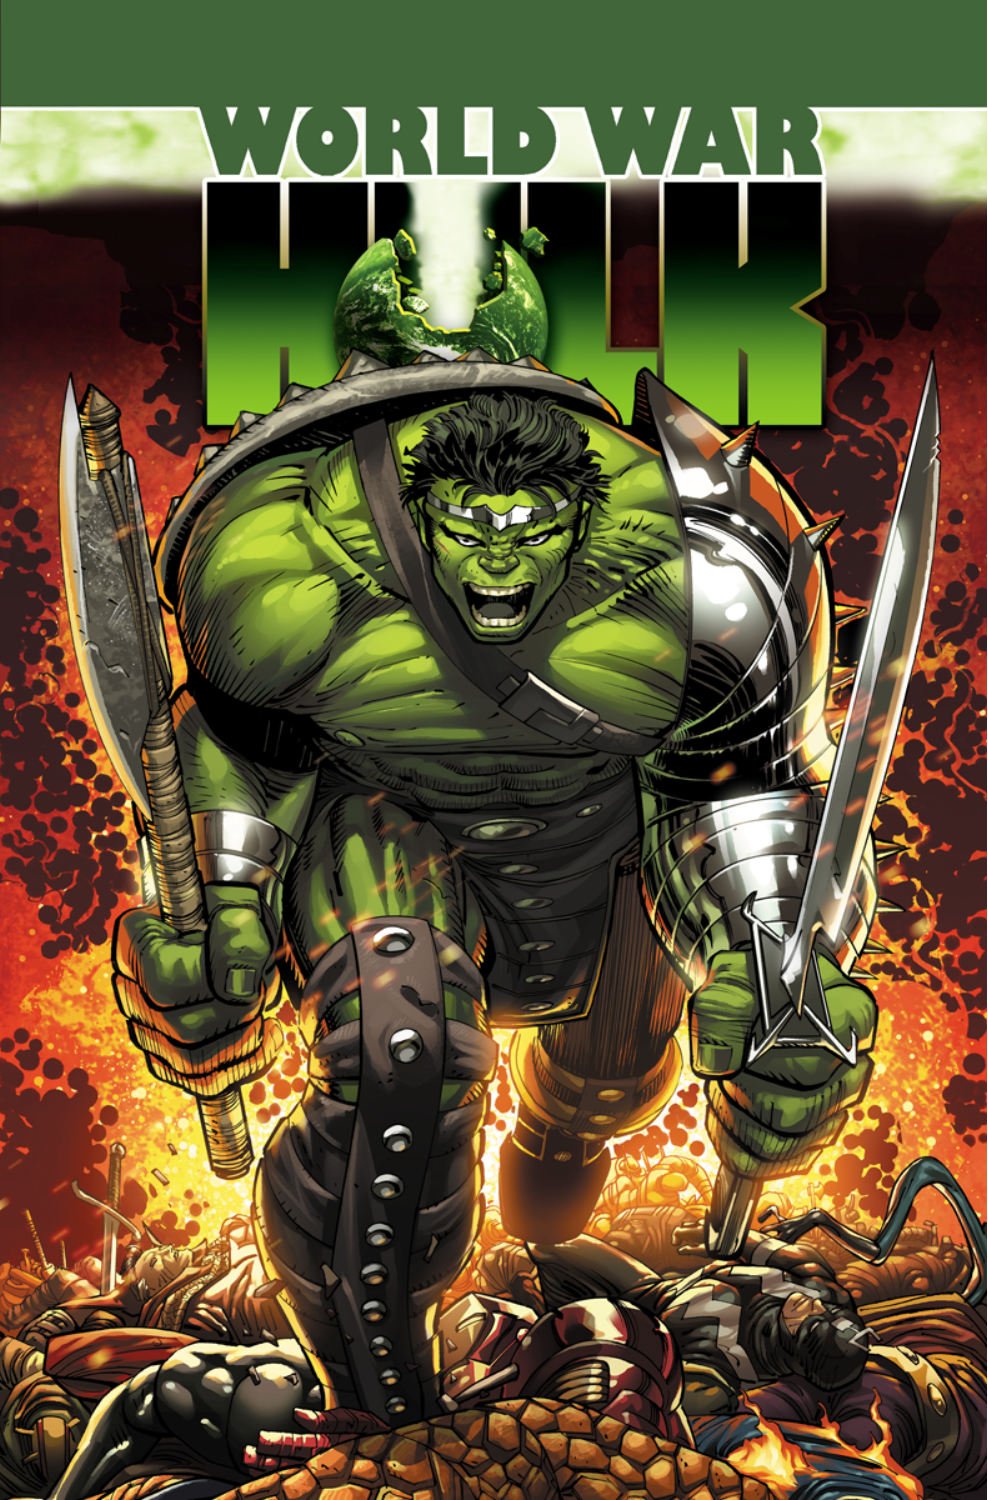 Geek insider, geekinsider, geekinsider. Com,, thor ragnarok: comics to read if you're jazzed about the movie, entertainment